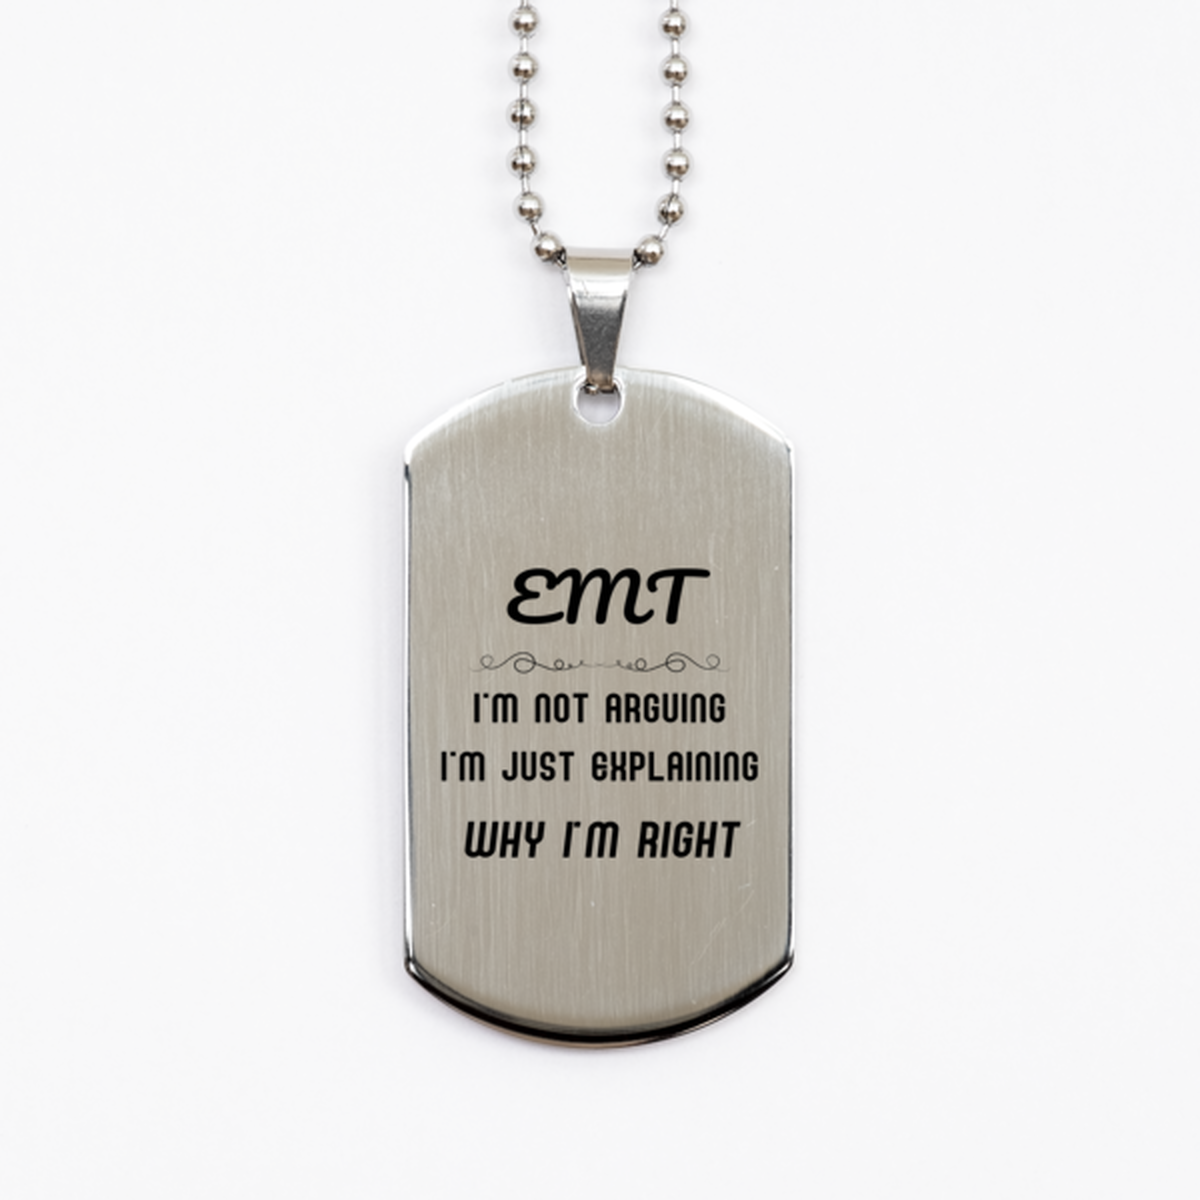 EMT I'm not Arguing. I'm Just Explaining Why I'm RIGHT Silver Dog Tag, Funny Saying Quote EMT Gifts For EMT Graduation Birthday Christmas Gifts for Men Women Coworker